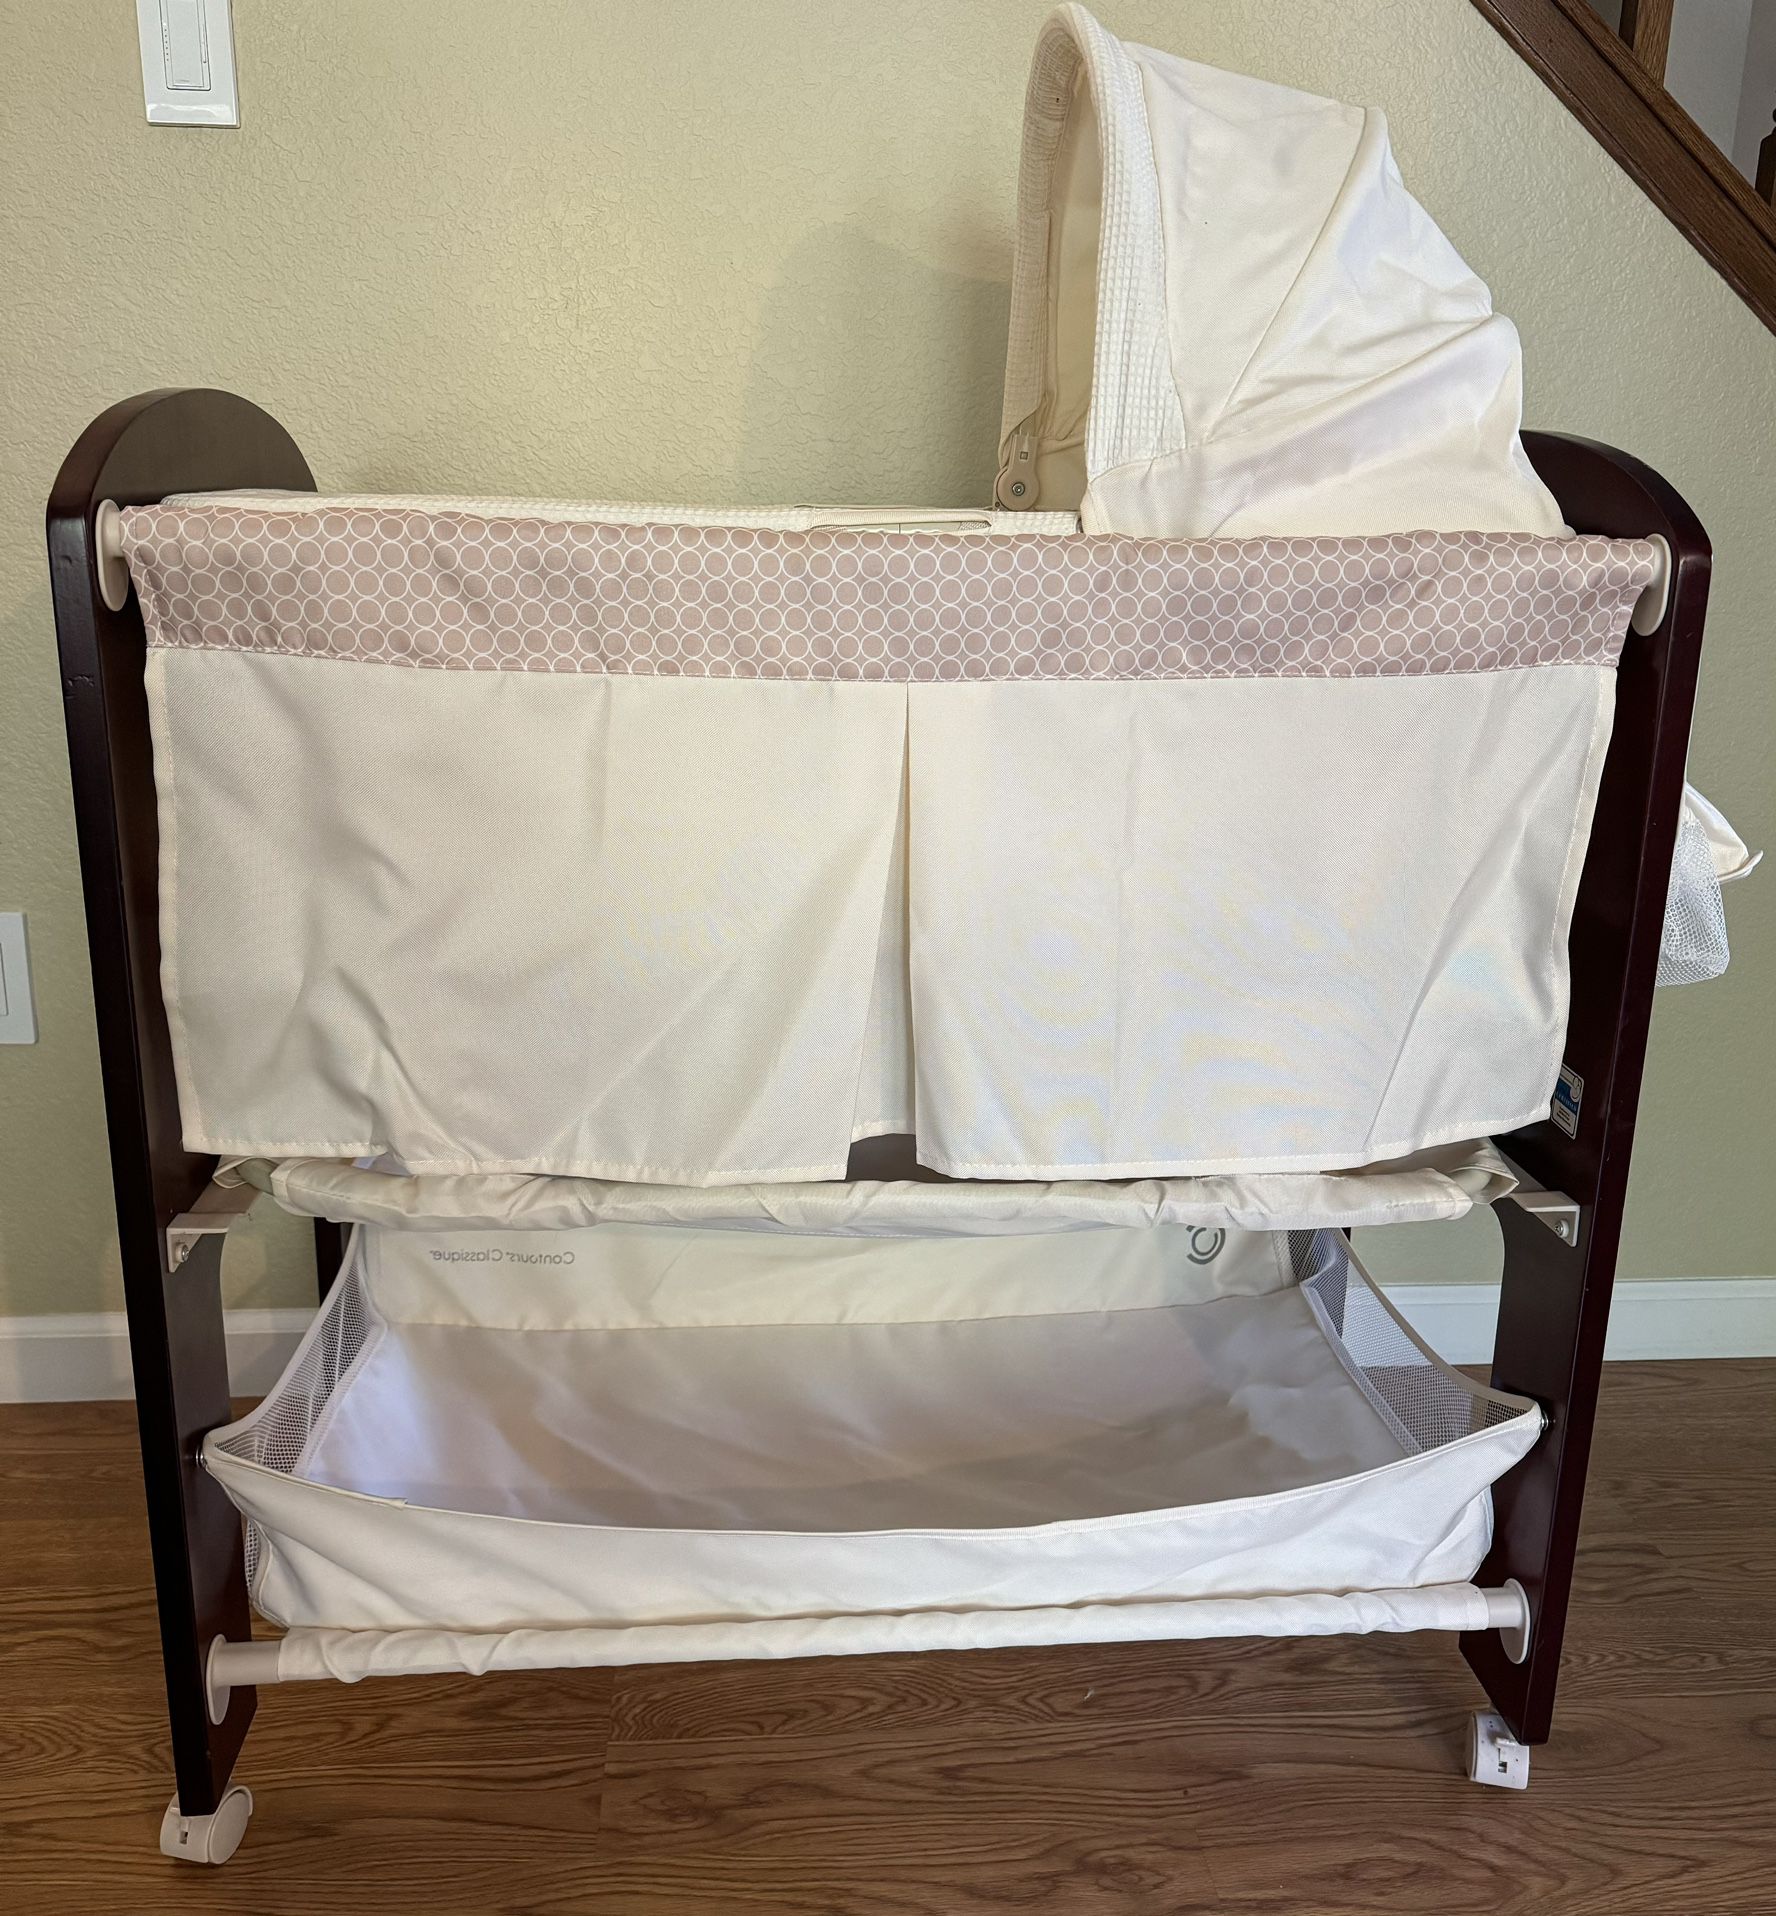 Contours Classique 3 In 1 Bassinet/Changing Table